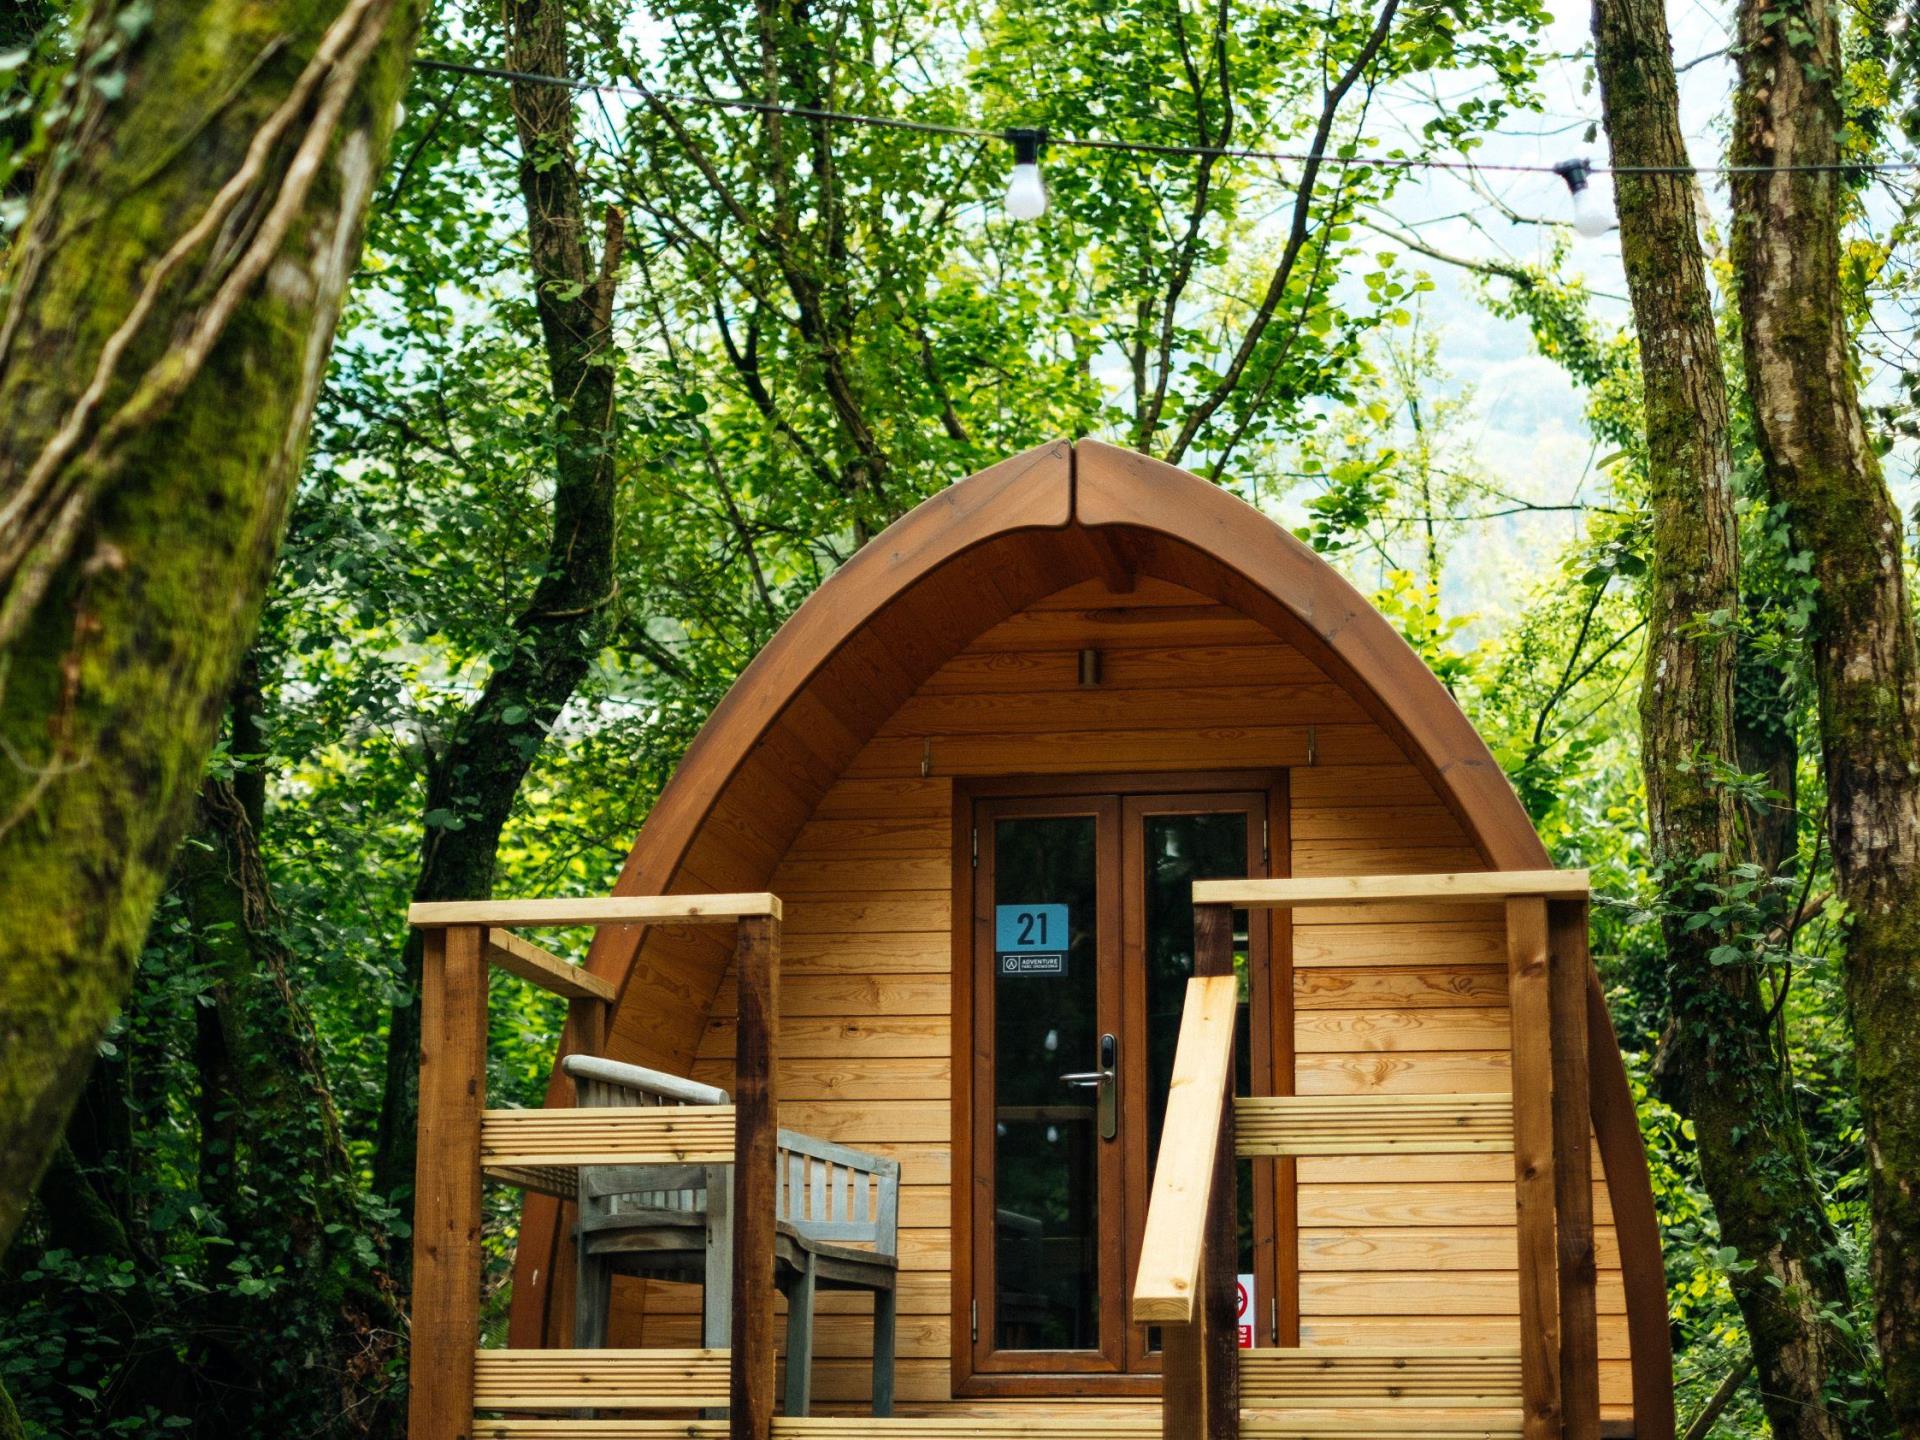 Each glamping pod comes with a decked seating area